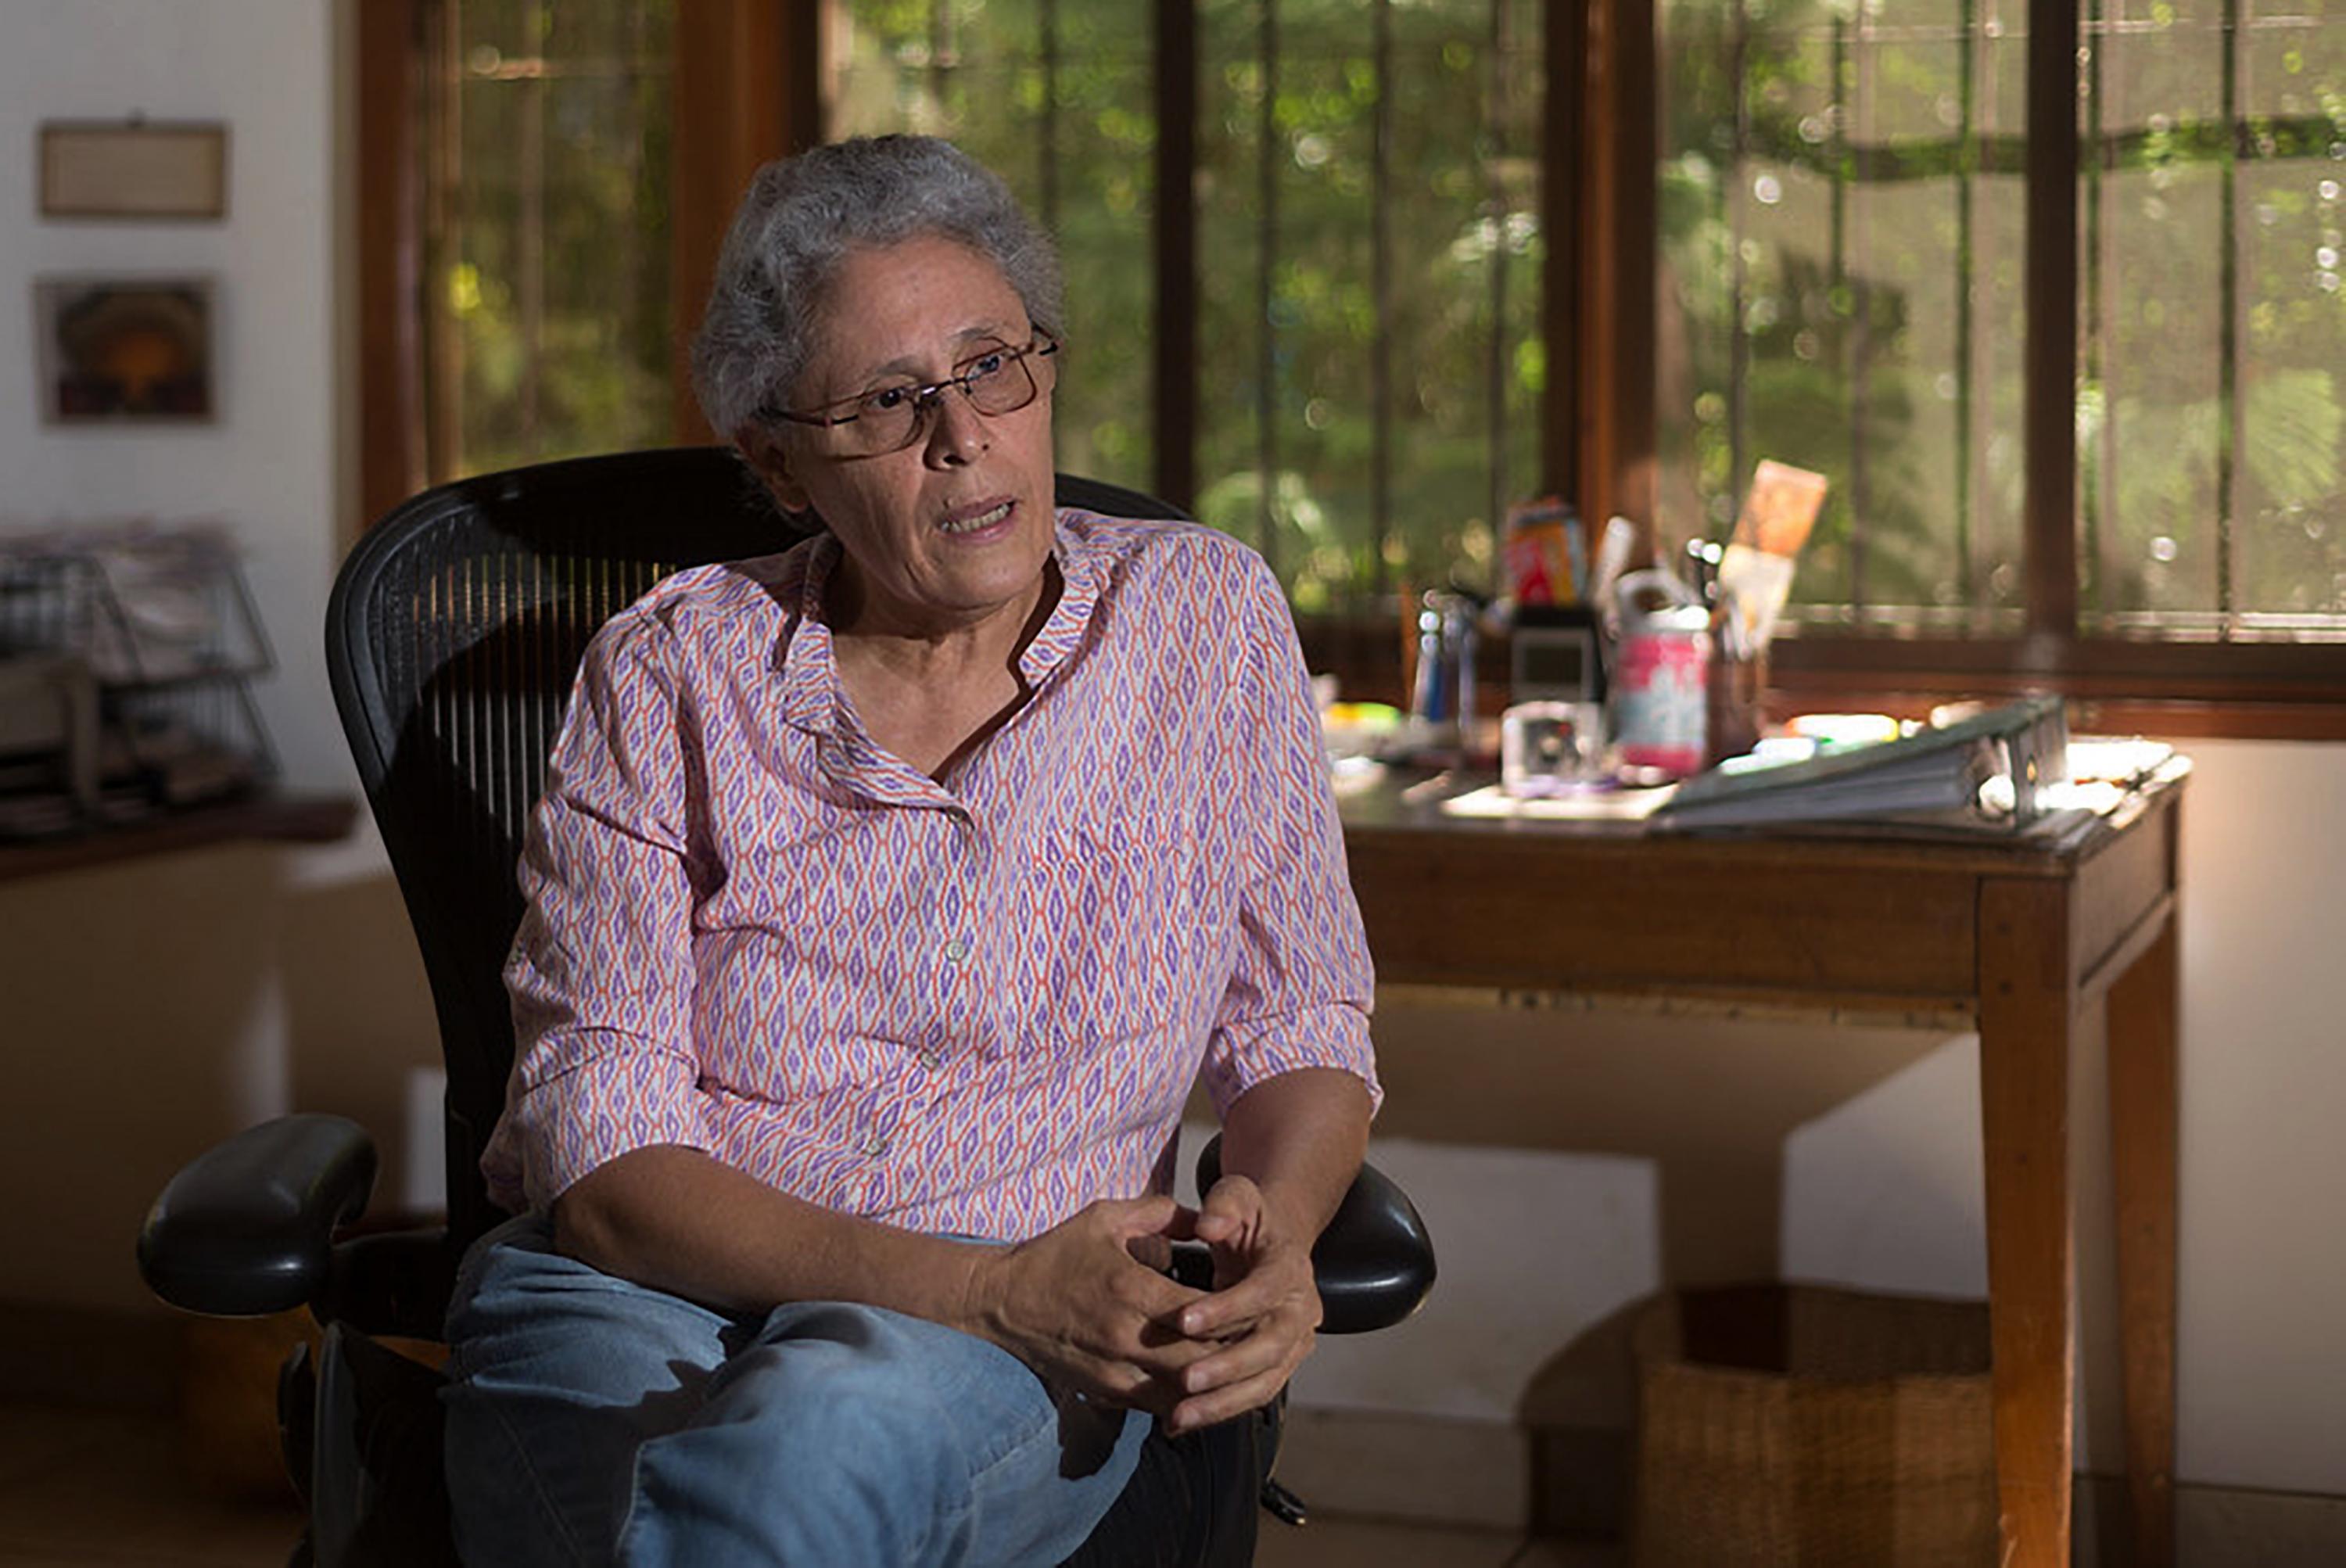 Dora María Téllez in her former home in Nicaragua. The ex-Sandinista guerrilla fighter was imprisoned for 22 months and was released and exiled from her country by the Ortega-Murillo regime in February 2023. Photo Carlos Herrera